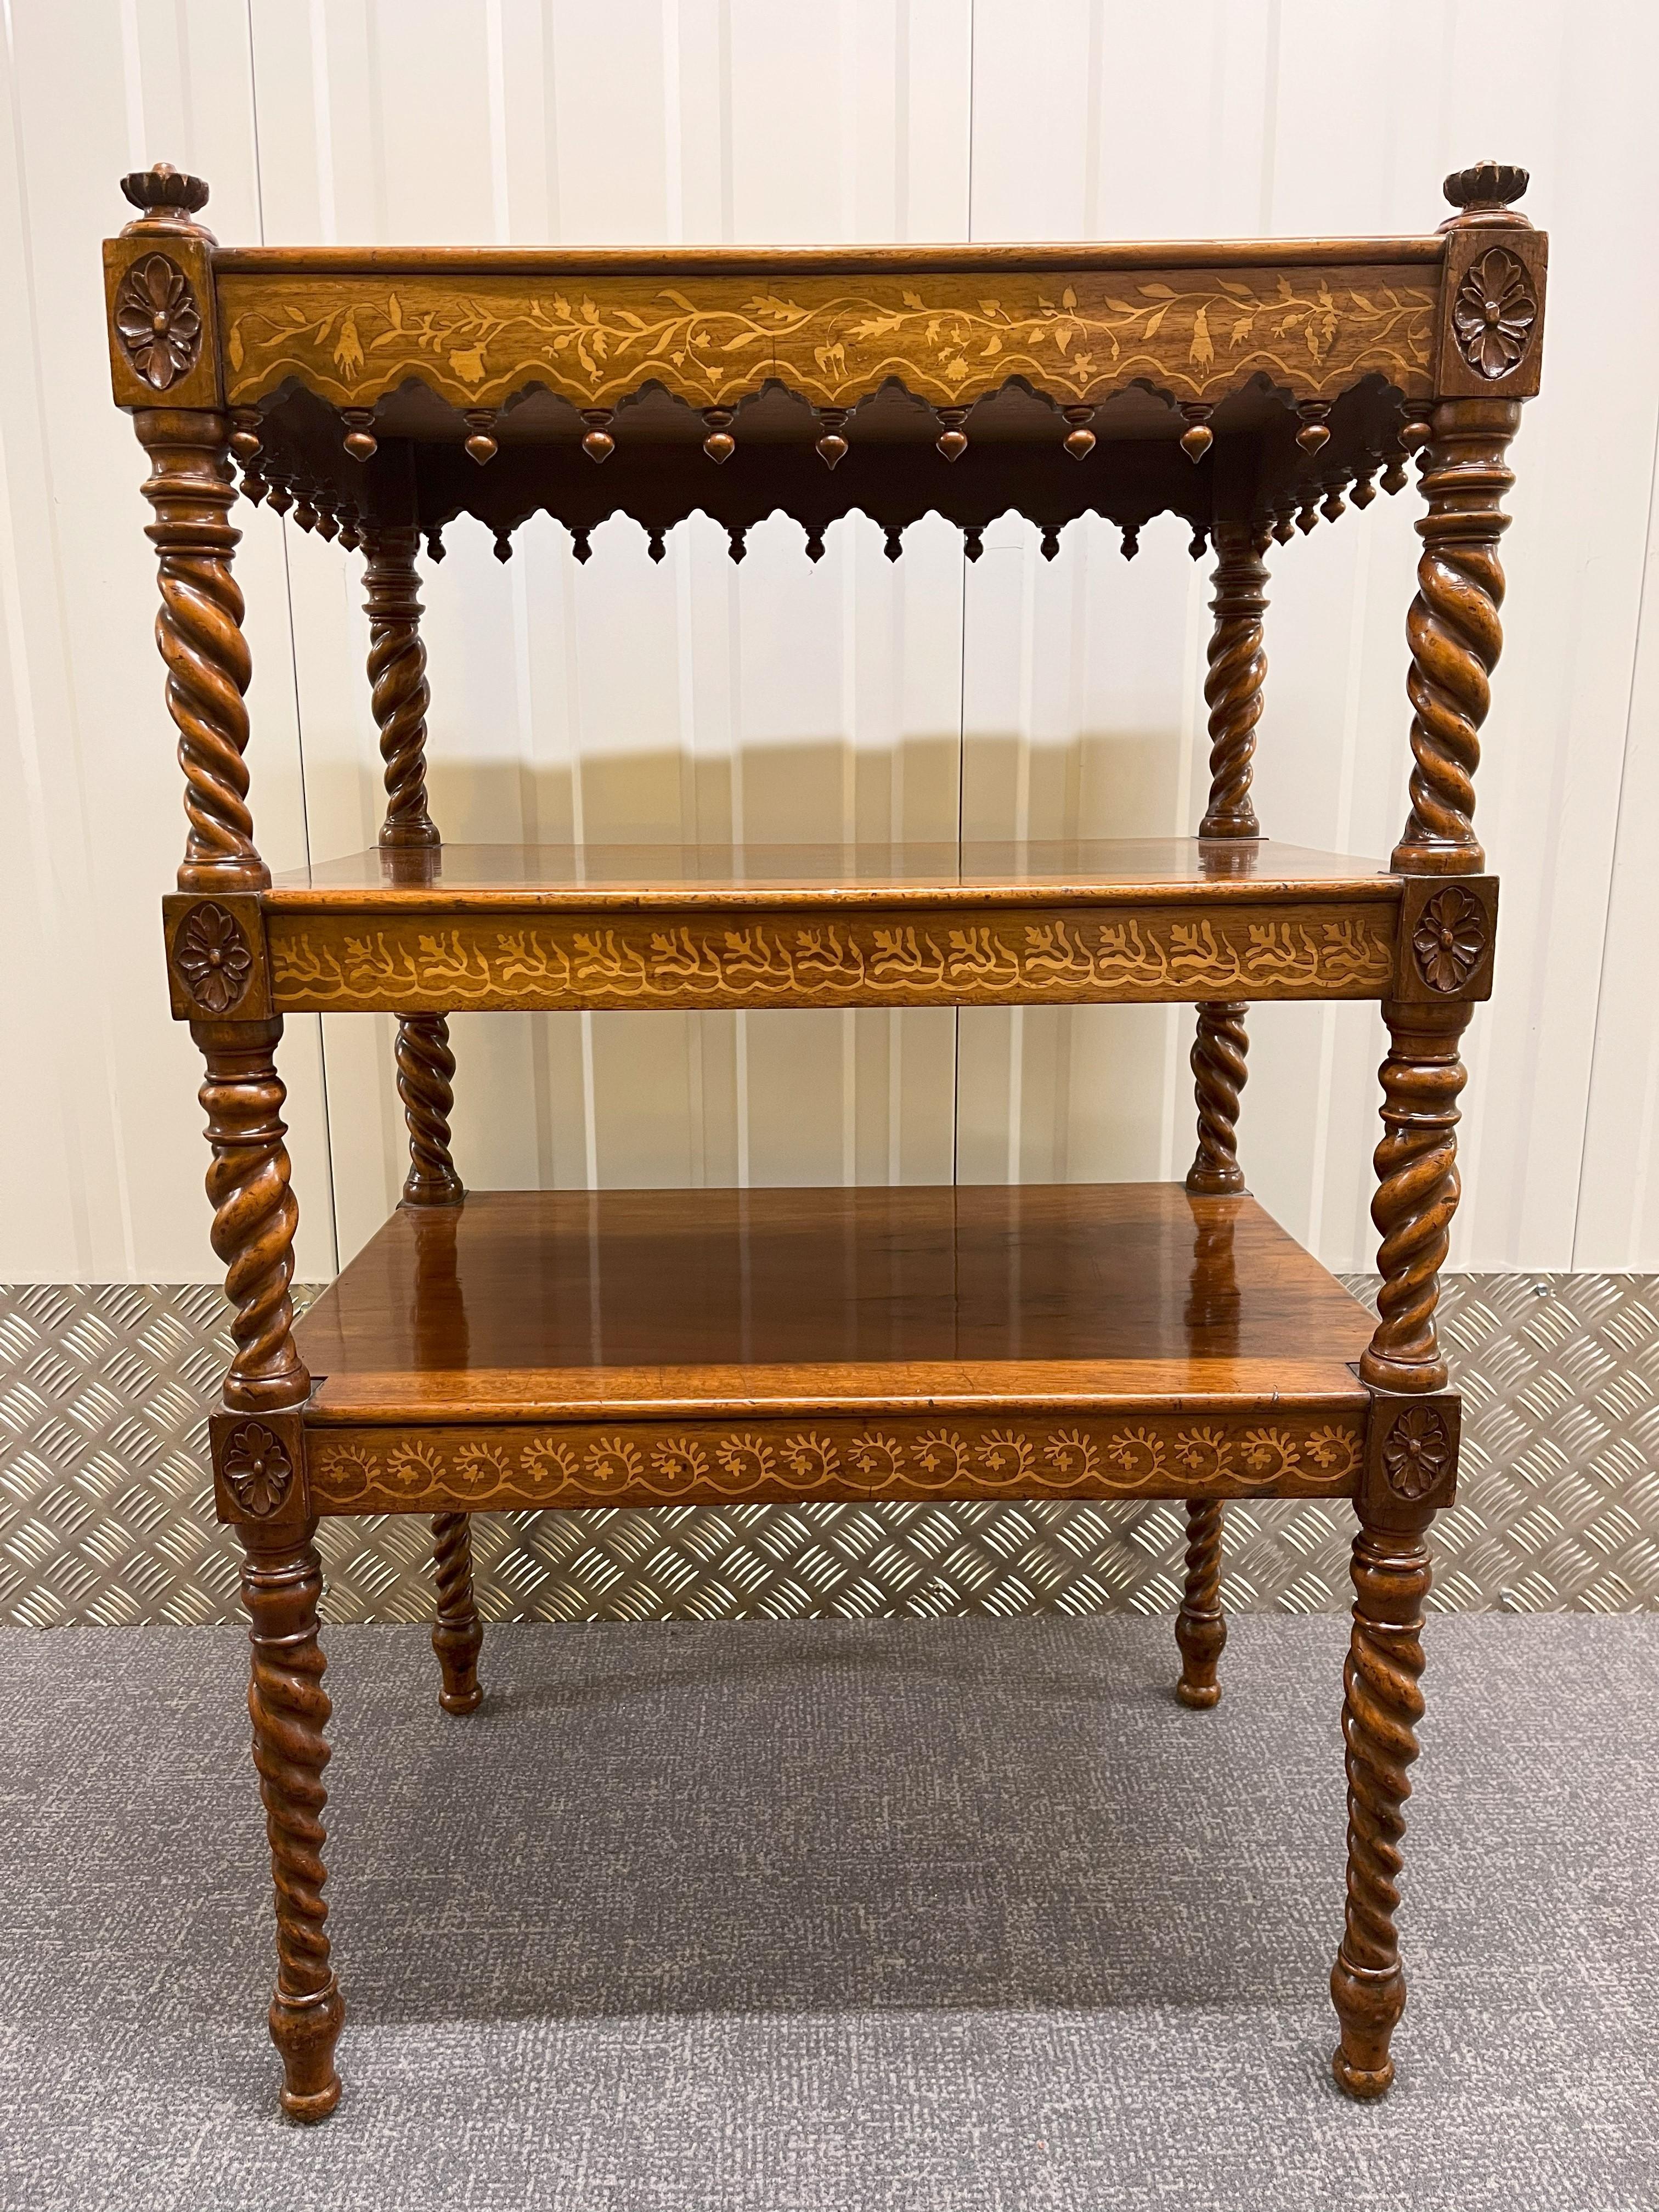 An attractive antique 3 tier Whatnot, English polished Walnut with inlaid side decorations and turned baluster's, early 19th century.    